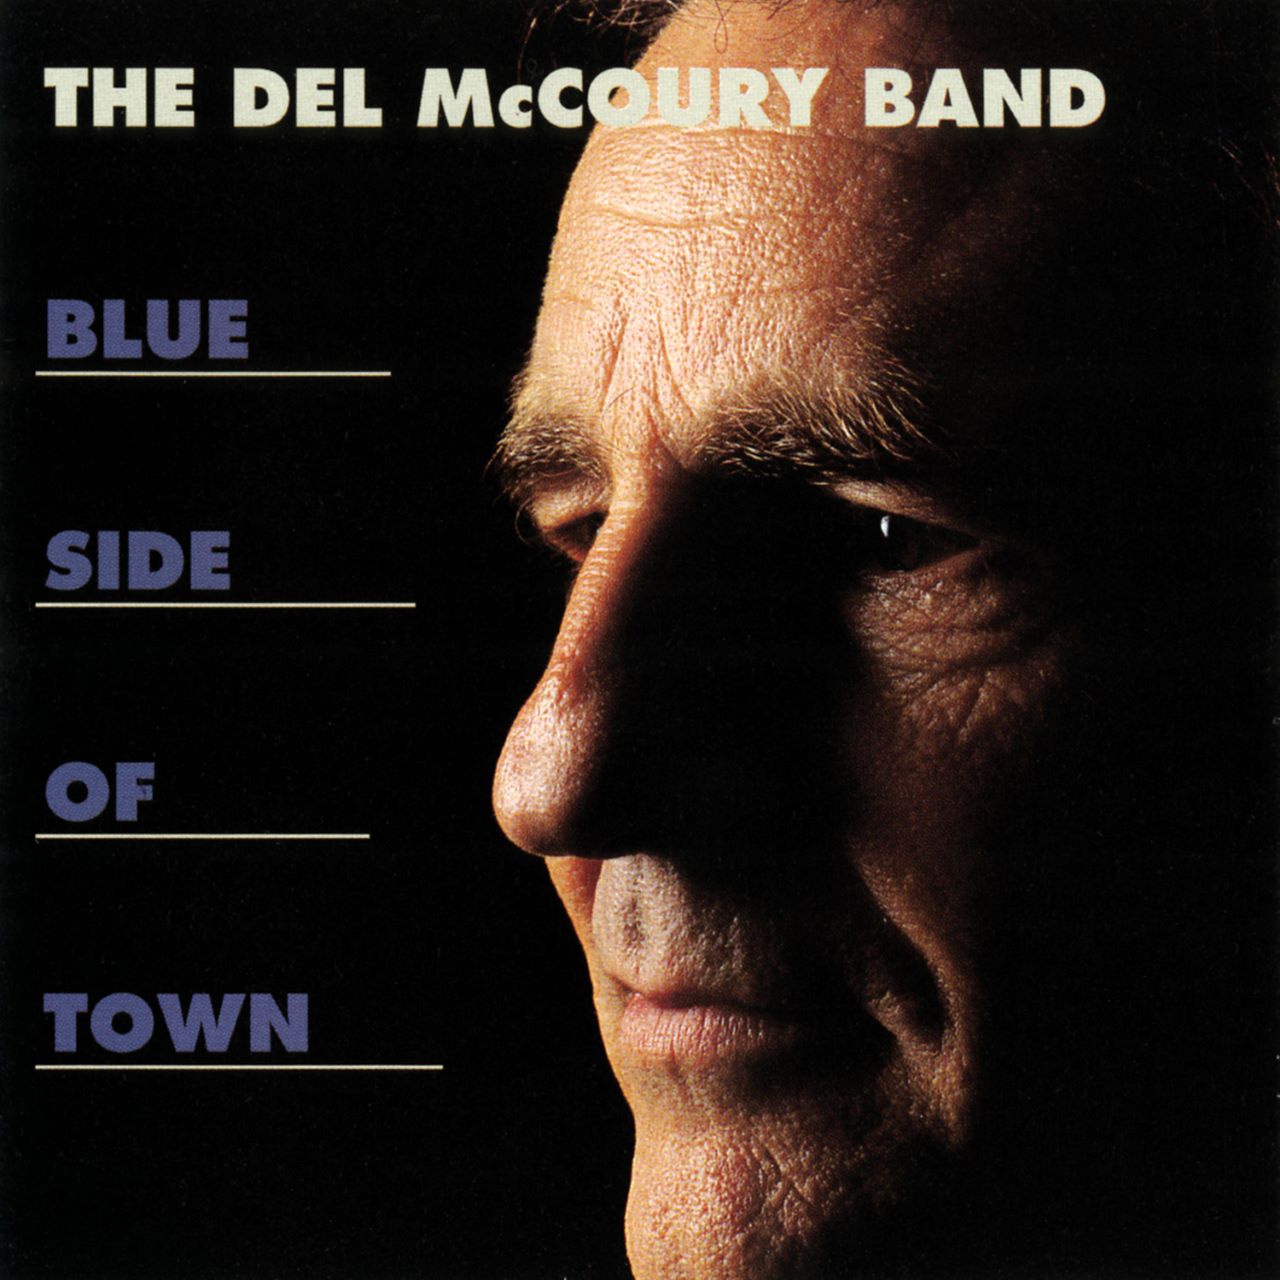 Del McCoury Band - Blue Side Of Town cover album